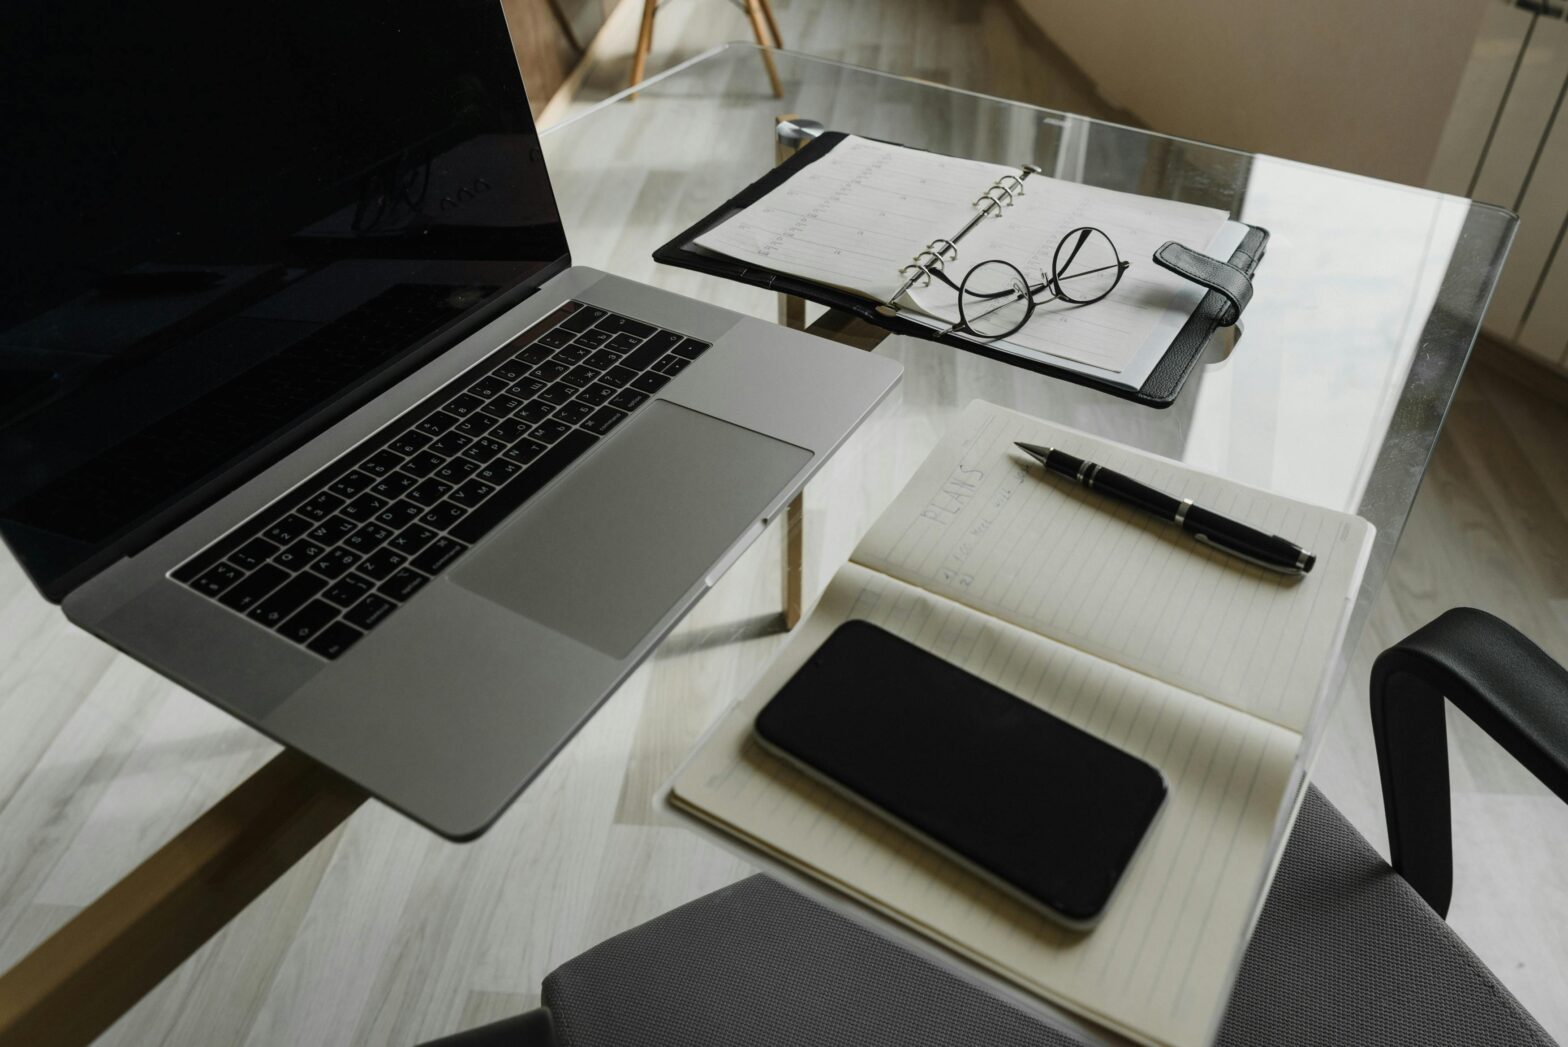 An image of a glass table top. Placed on top include a macbook, an iphone, mutlple note pads and glasses